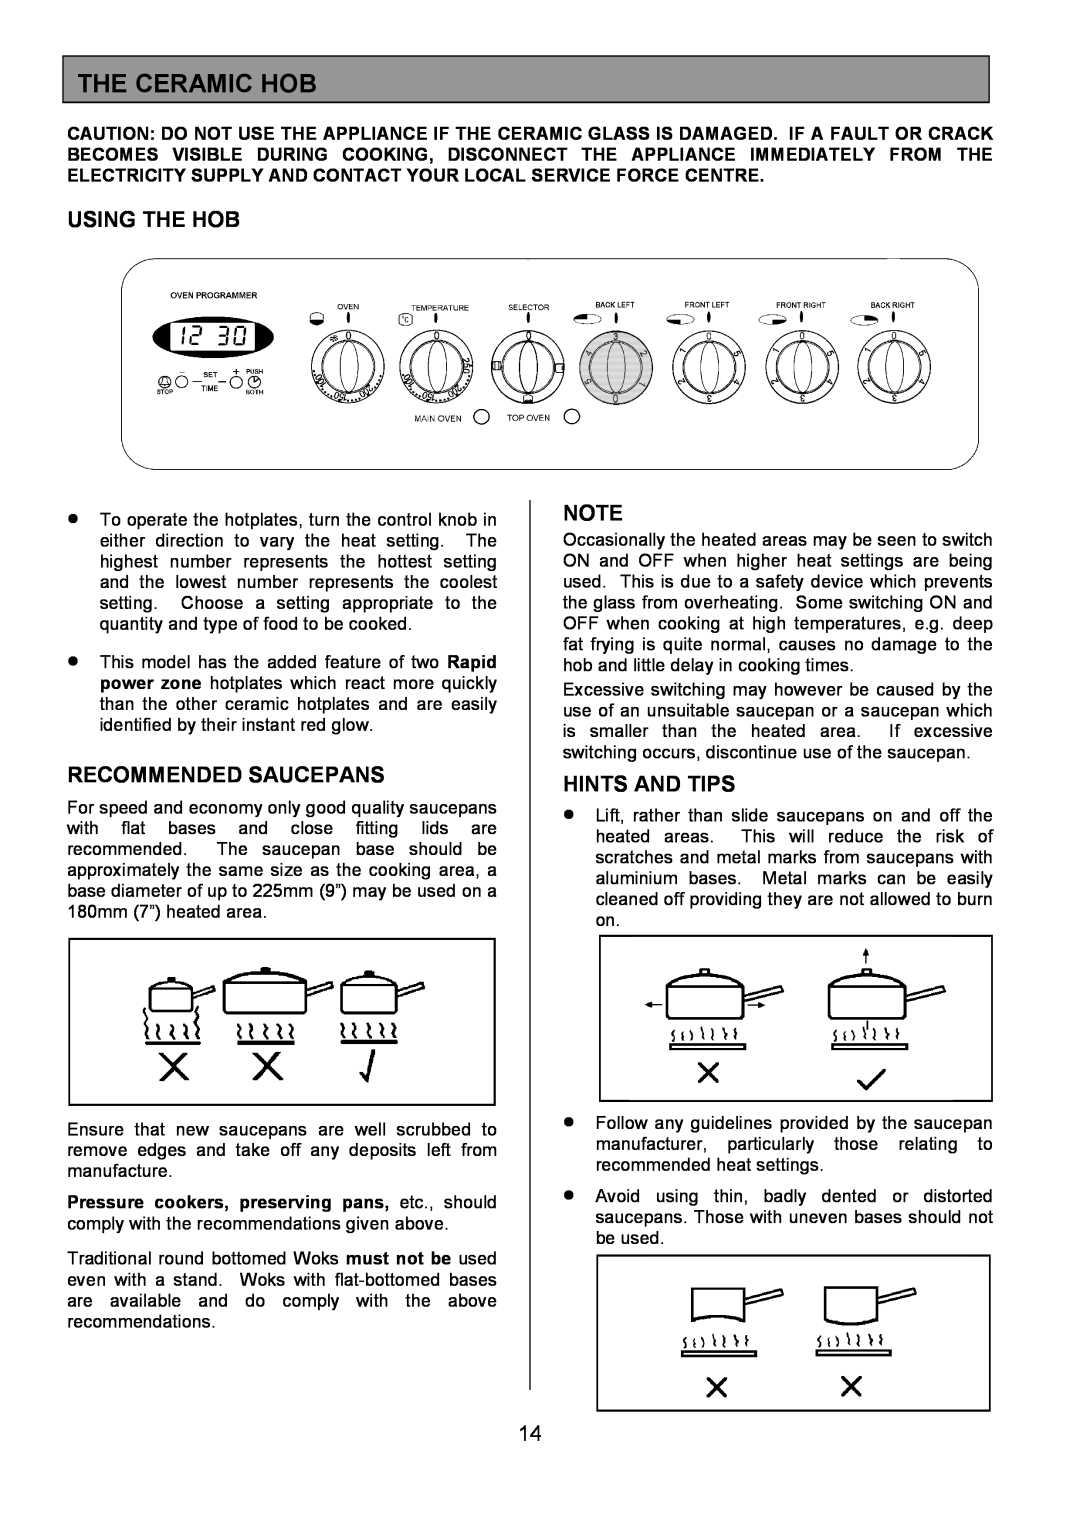 Tricity Bendix SIE514 installation instructions The Ceramic Hob, Using The Hob, Recommended Saucepans, Hints And Tips 